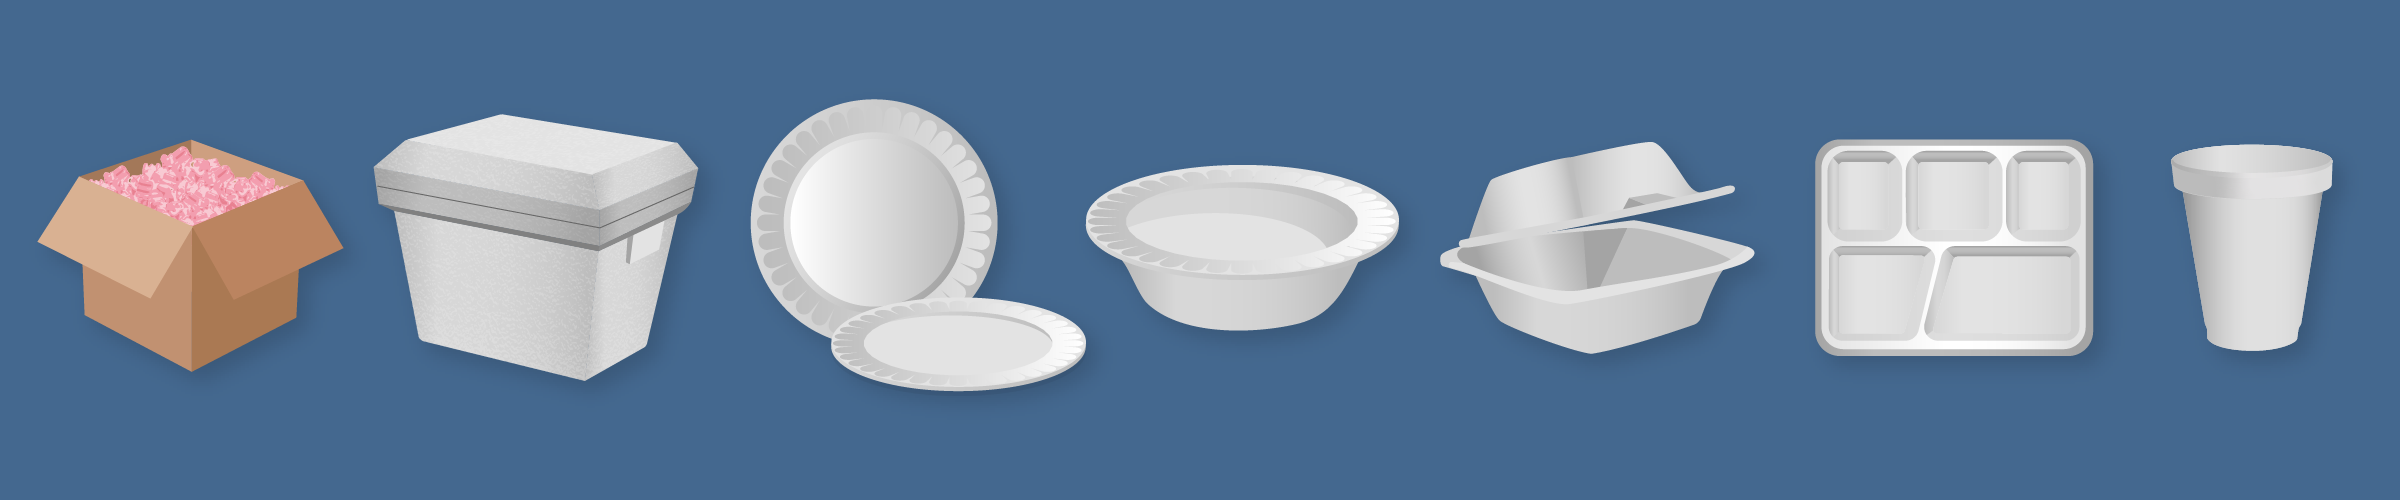 Images of expanded polystyrene products: cups, clamshells, plates, bowls, trays, coolers, and packaging peanuts.